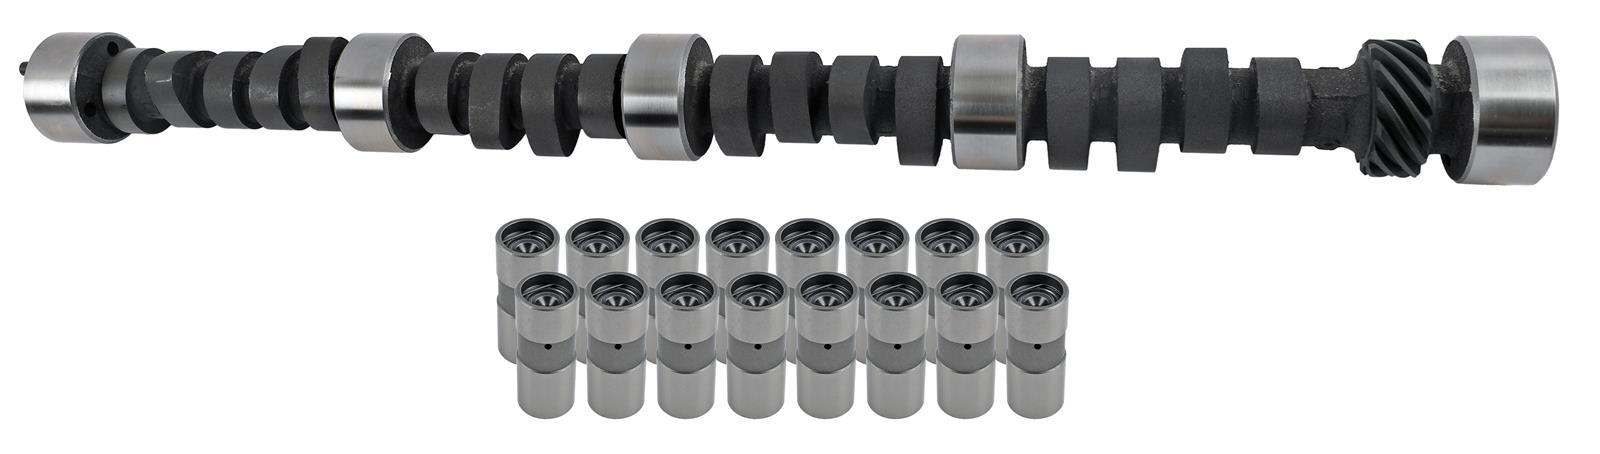 Howards Cams CL120941-11 Howards Cams Hydraulic Flat Tappet Camshaft and Lifter  Kits Summit Racing